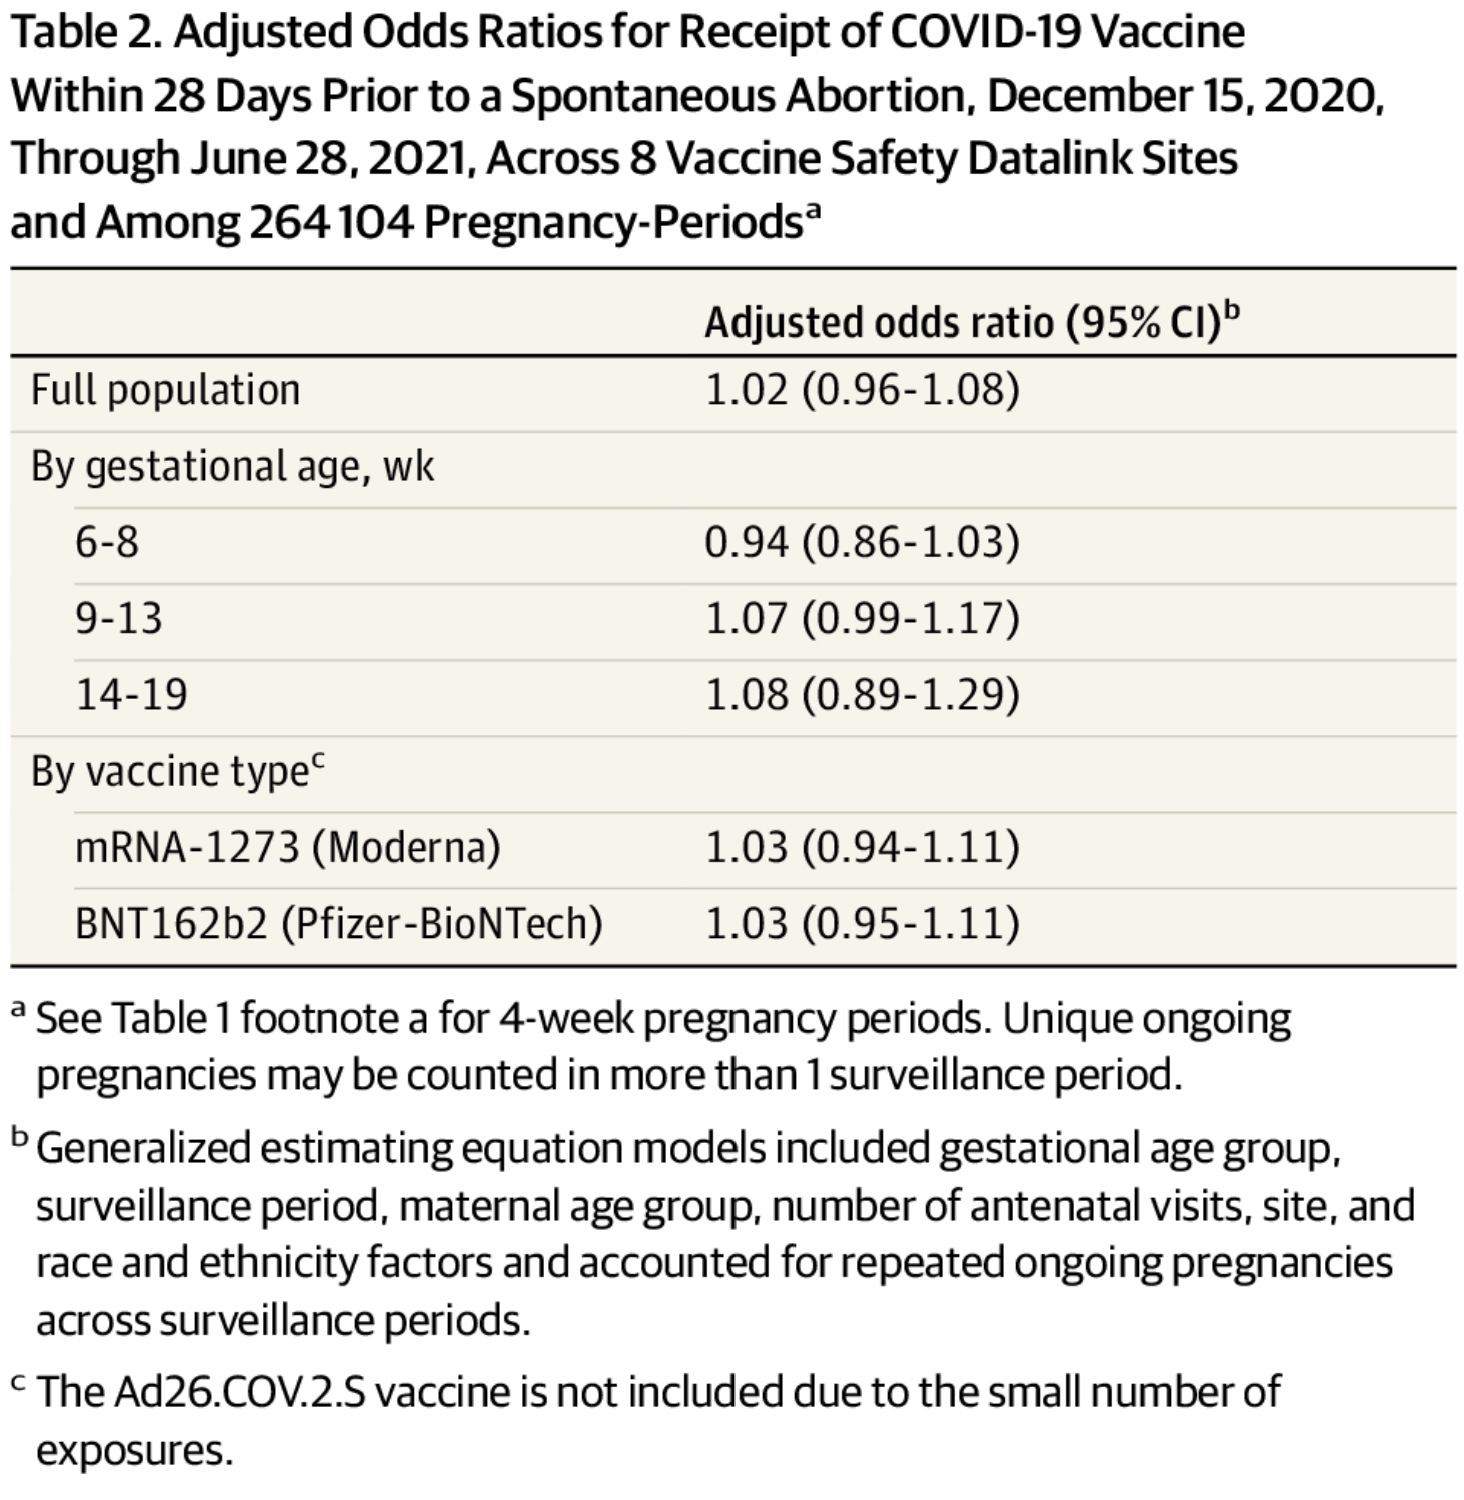 https://smart119.biz/covid-19/images/Spontaneous%20Abortion%20Following%20COVID-19%20Vaccination%20During%20Pregnancy%20table2.png